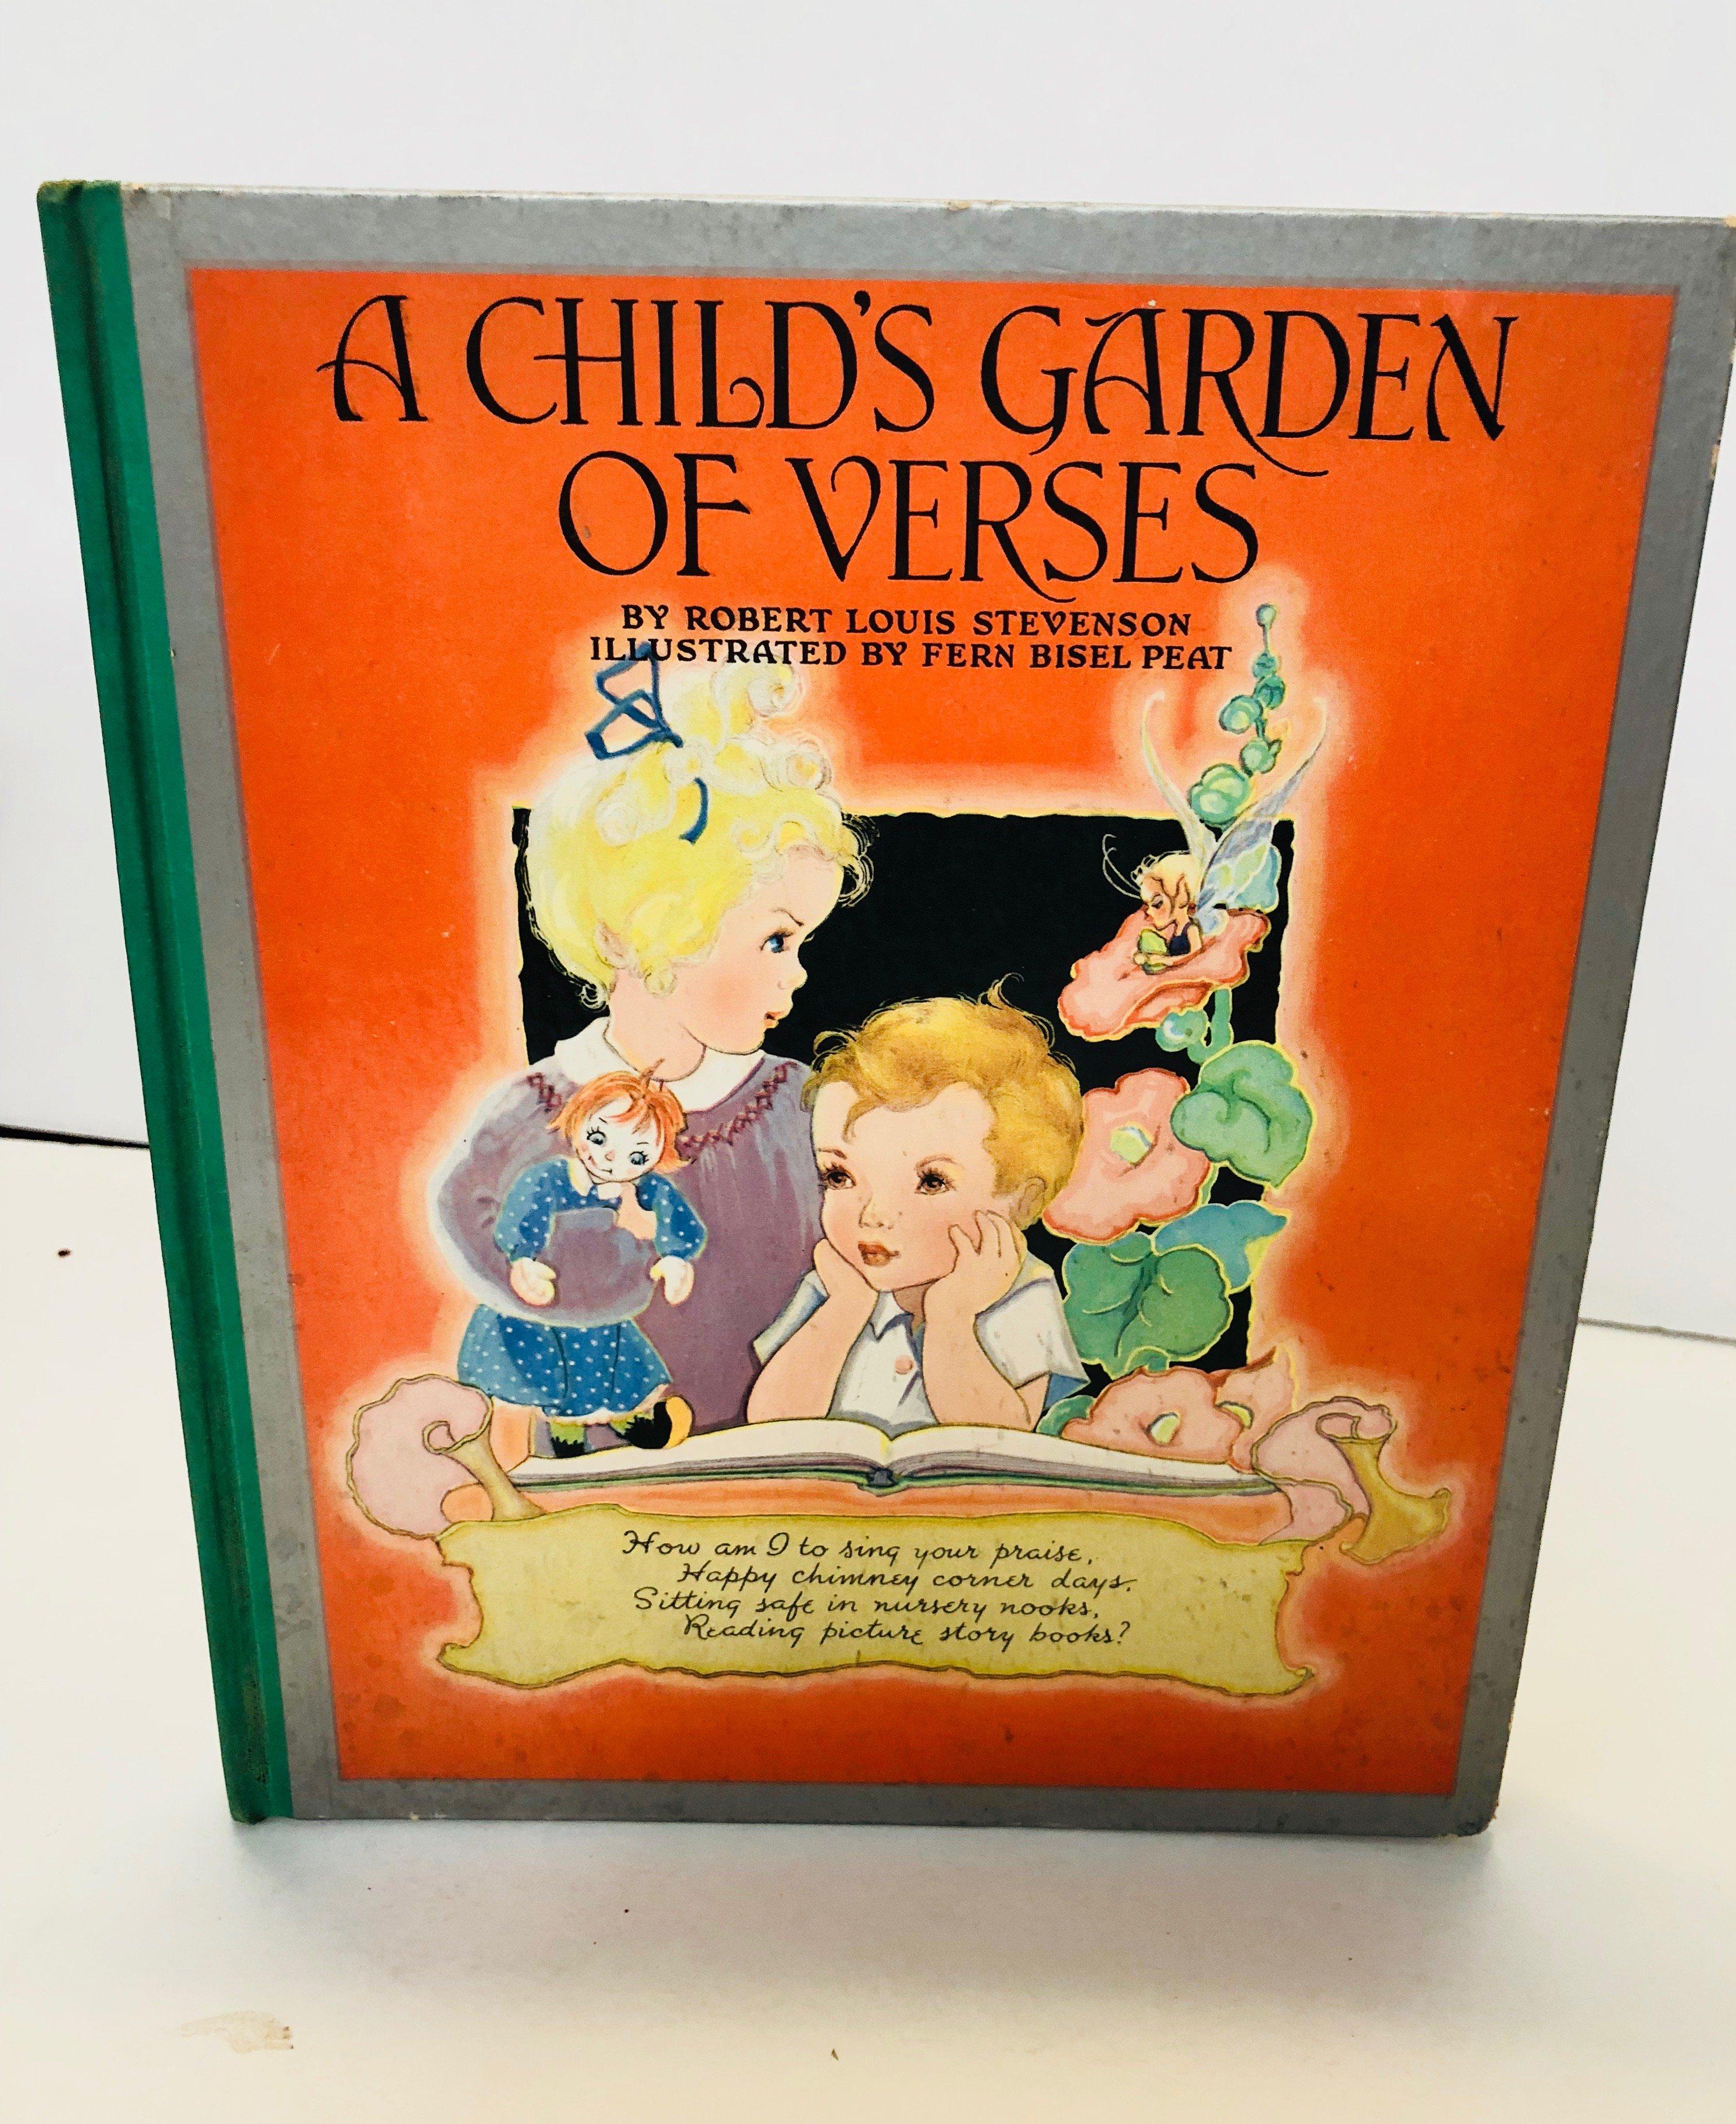 A Child's Garden of Verses by Robert Louis Stevenson (1940) Large illustrated hardcover